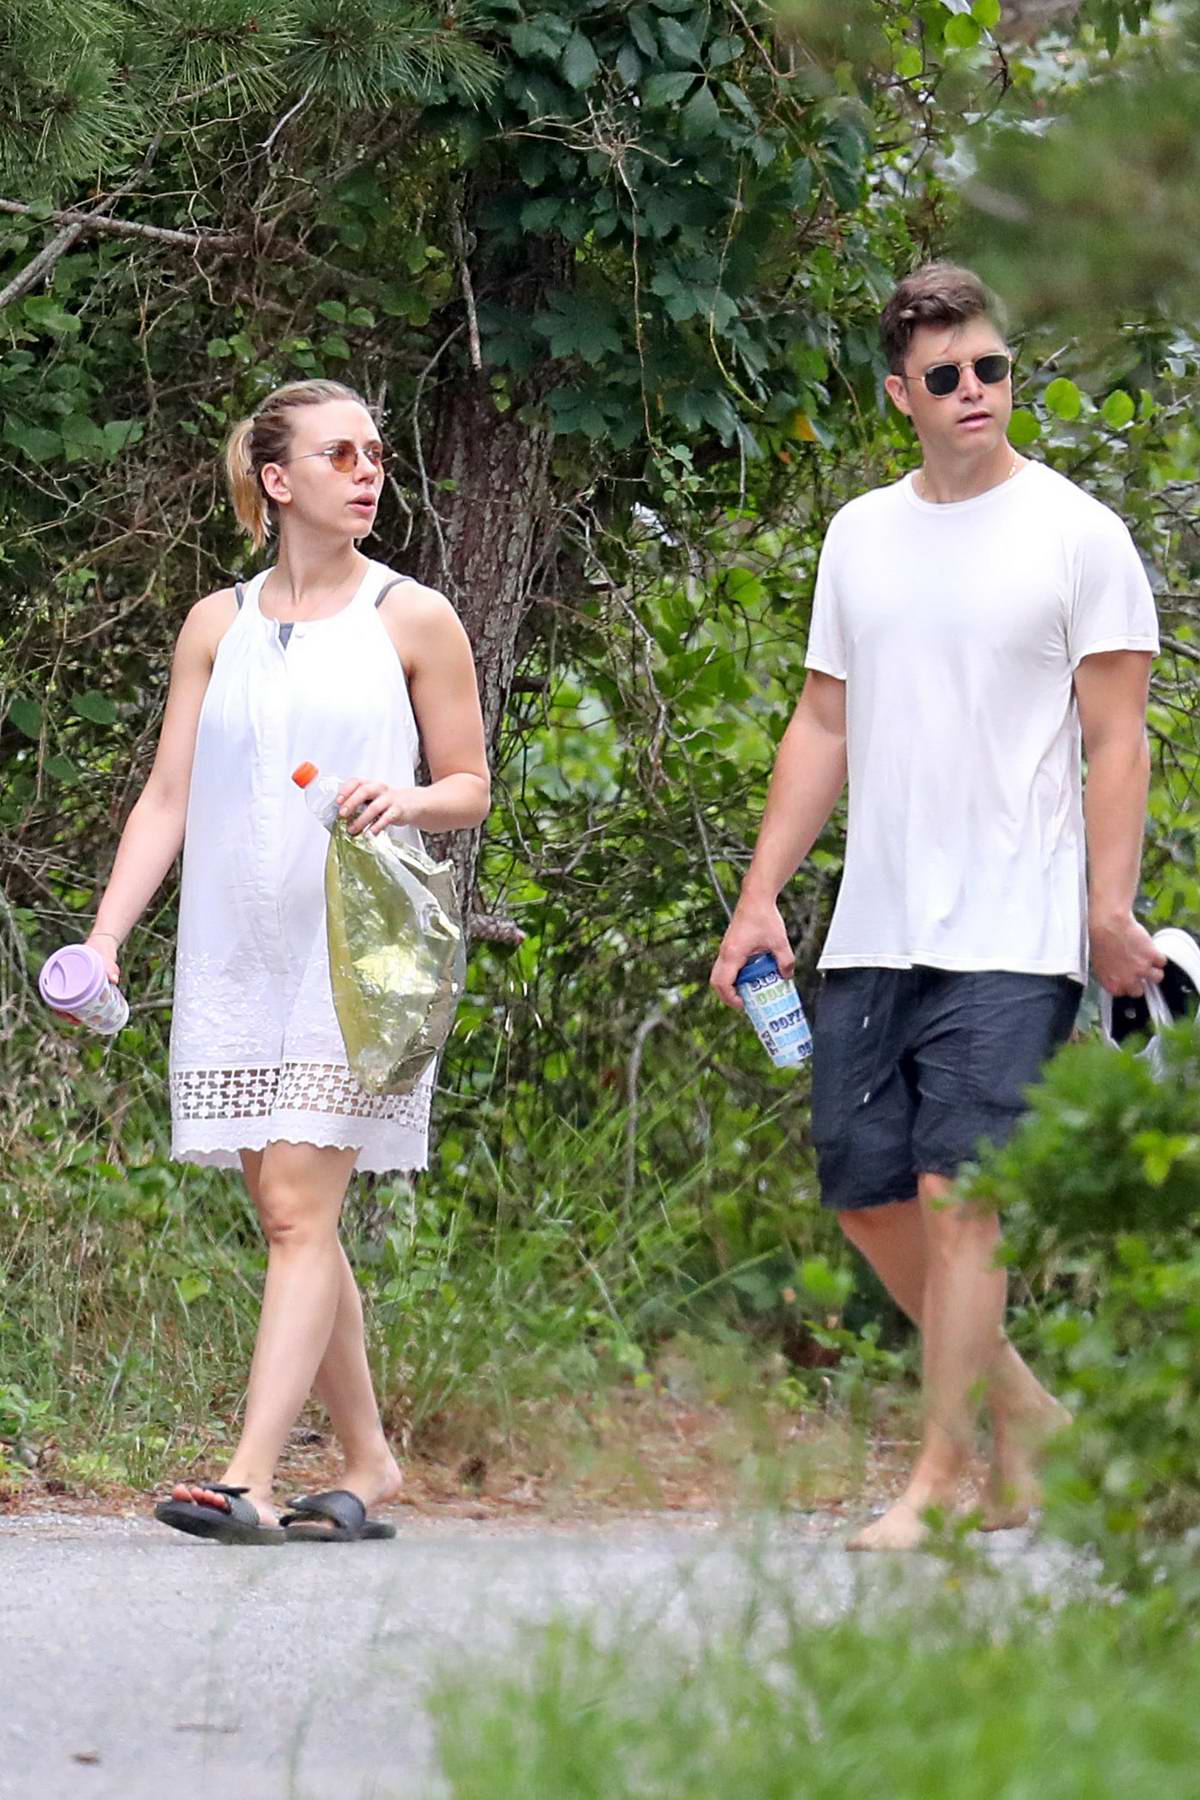 Scarlett Johansson And Colin Jost Stepped Out For A Beach Stroll In The